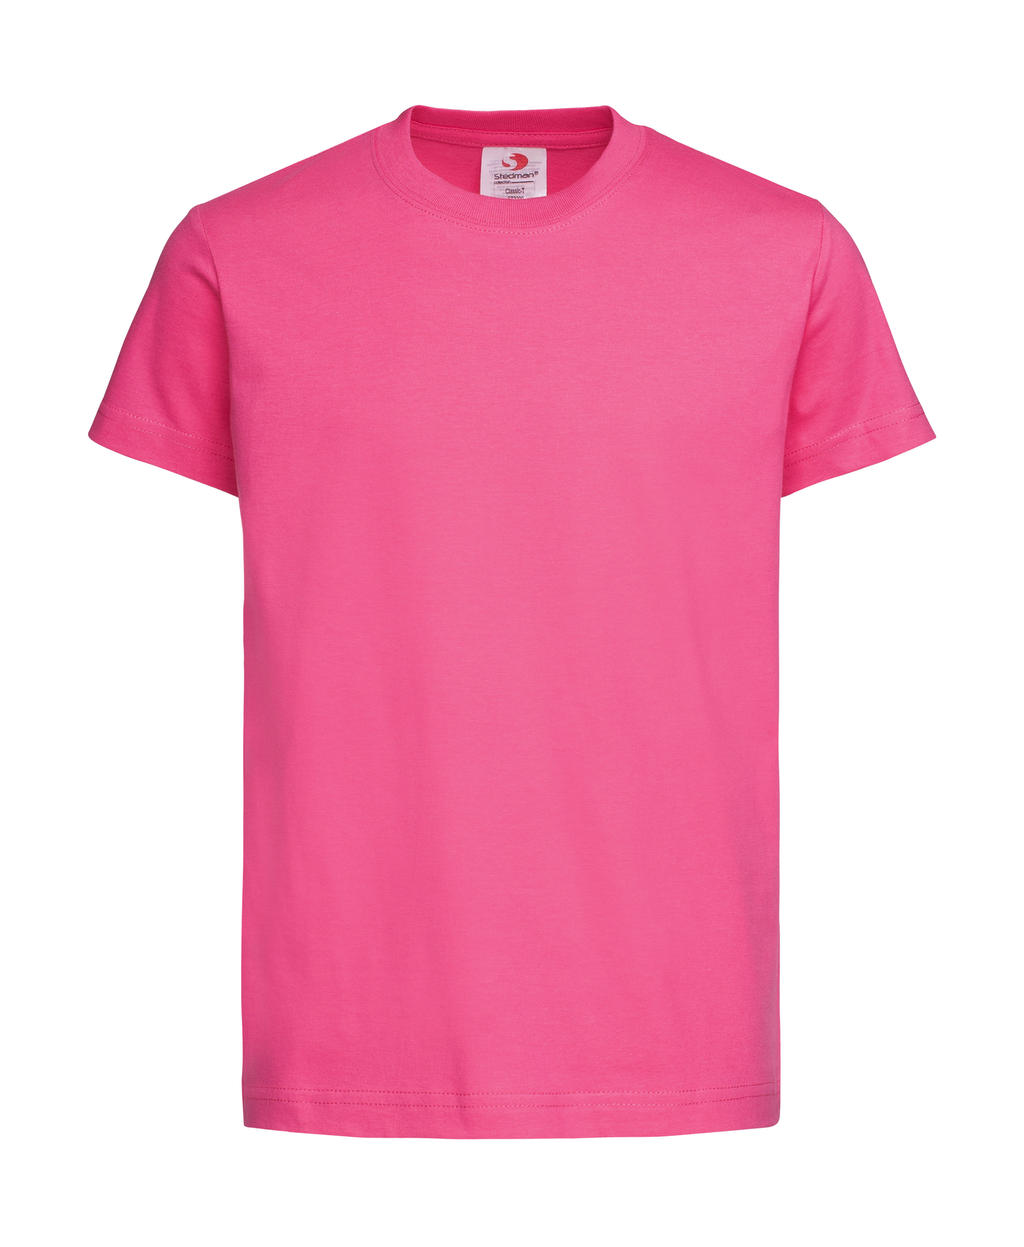  Classic-T Kids in Farbe Sweet Pink